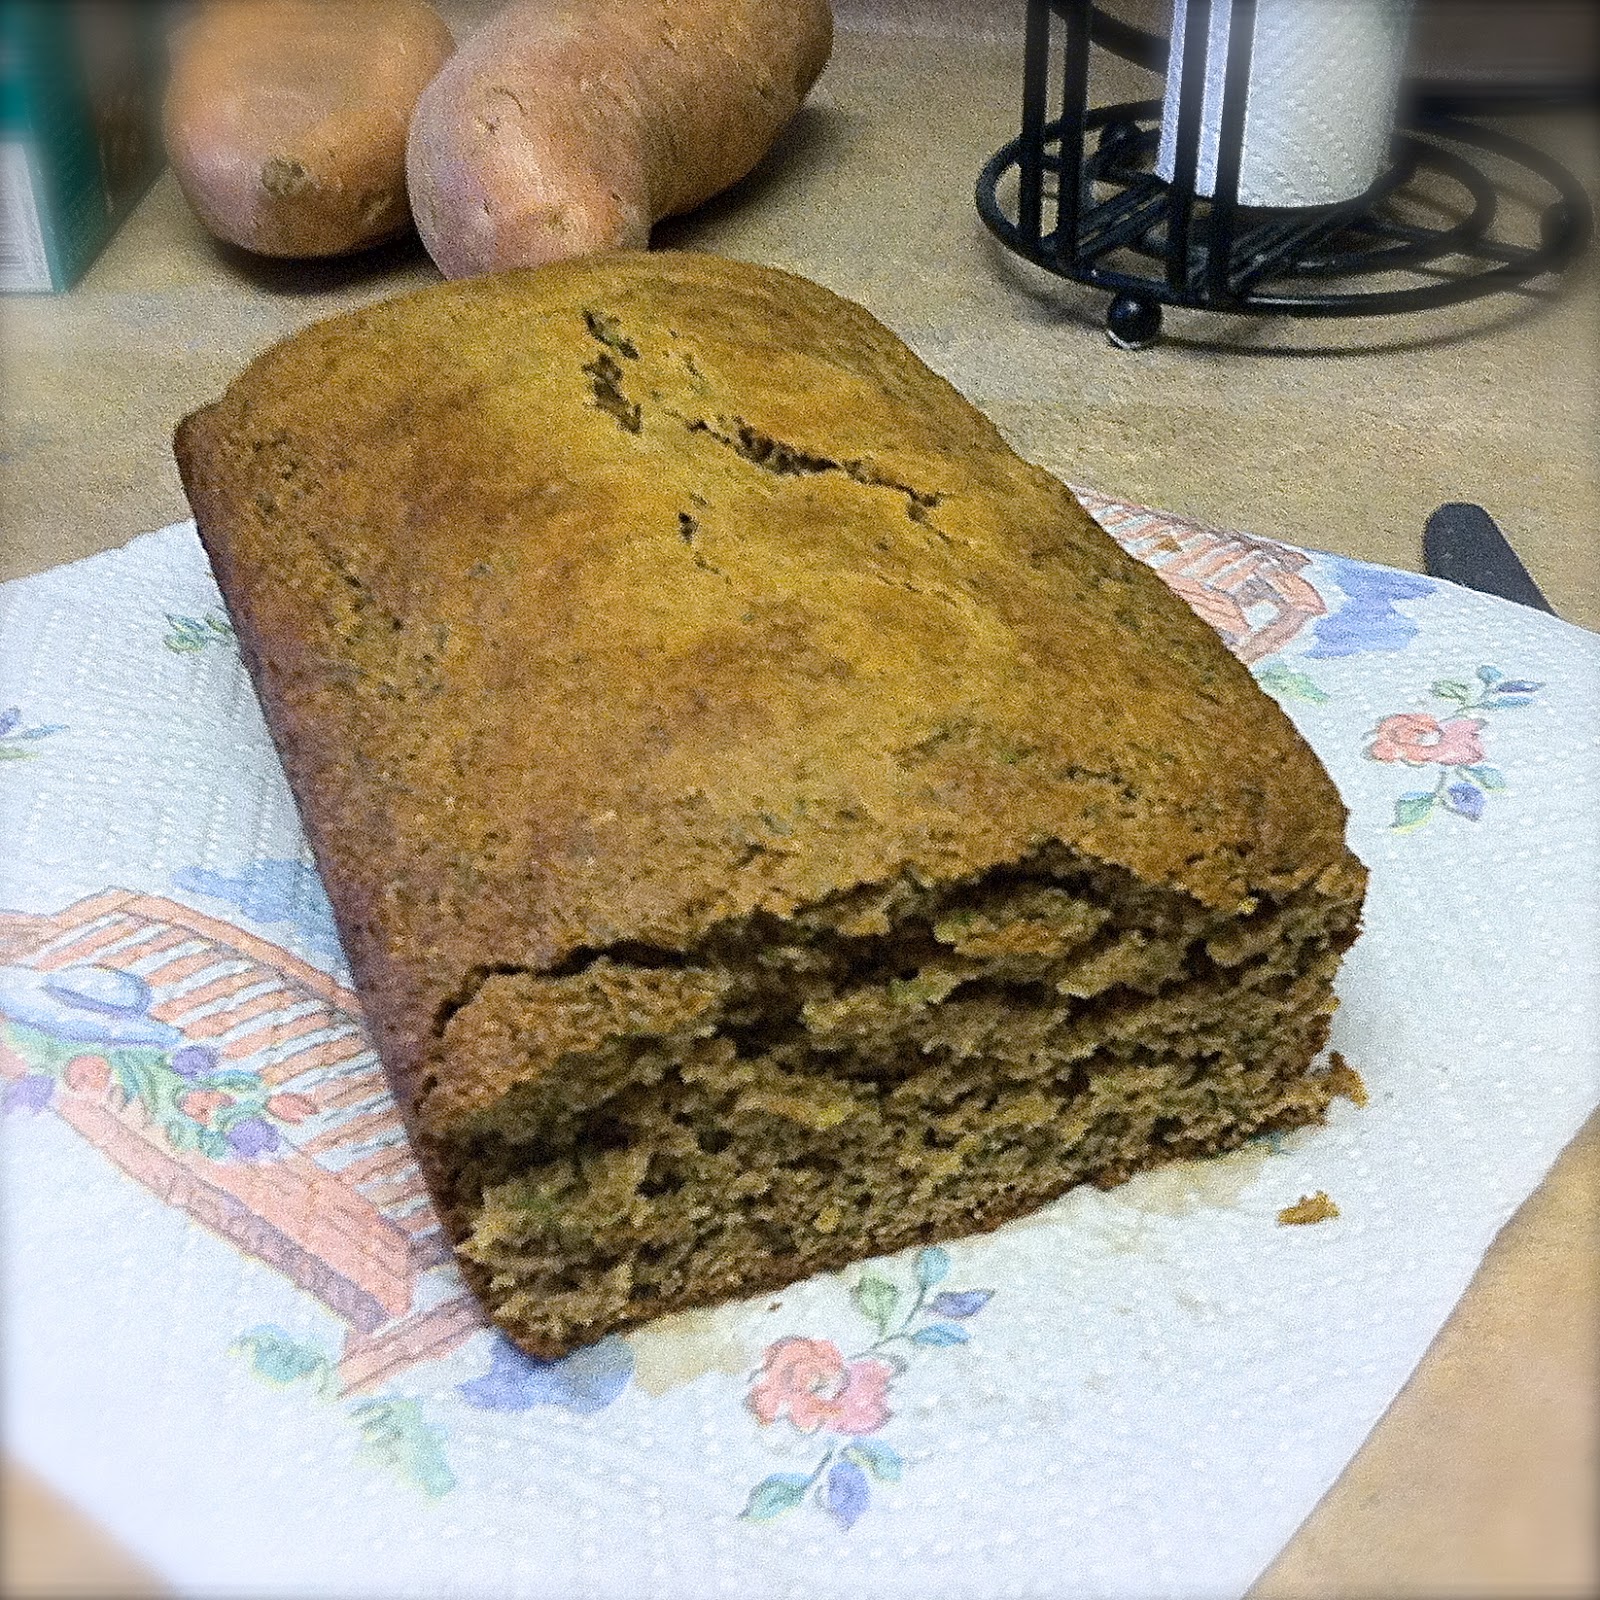 National Zucchini Bread Day-The Best Zucchini Bread I have ever made!